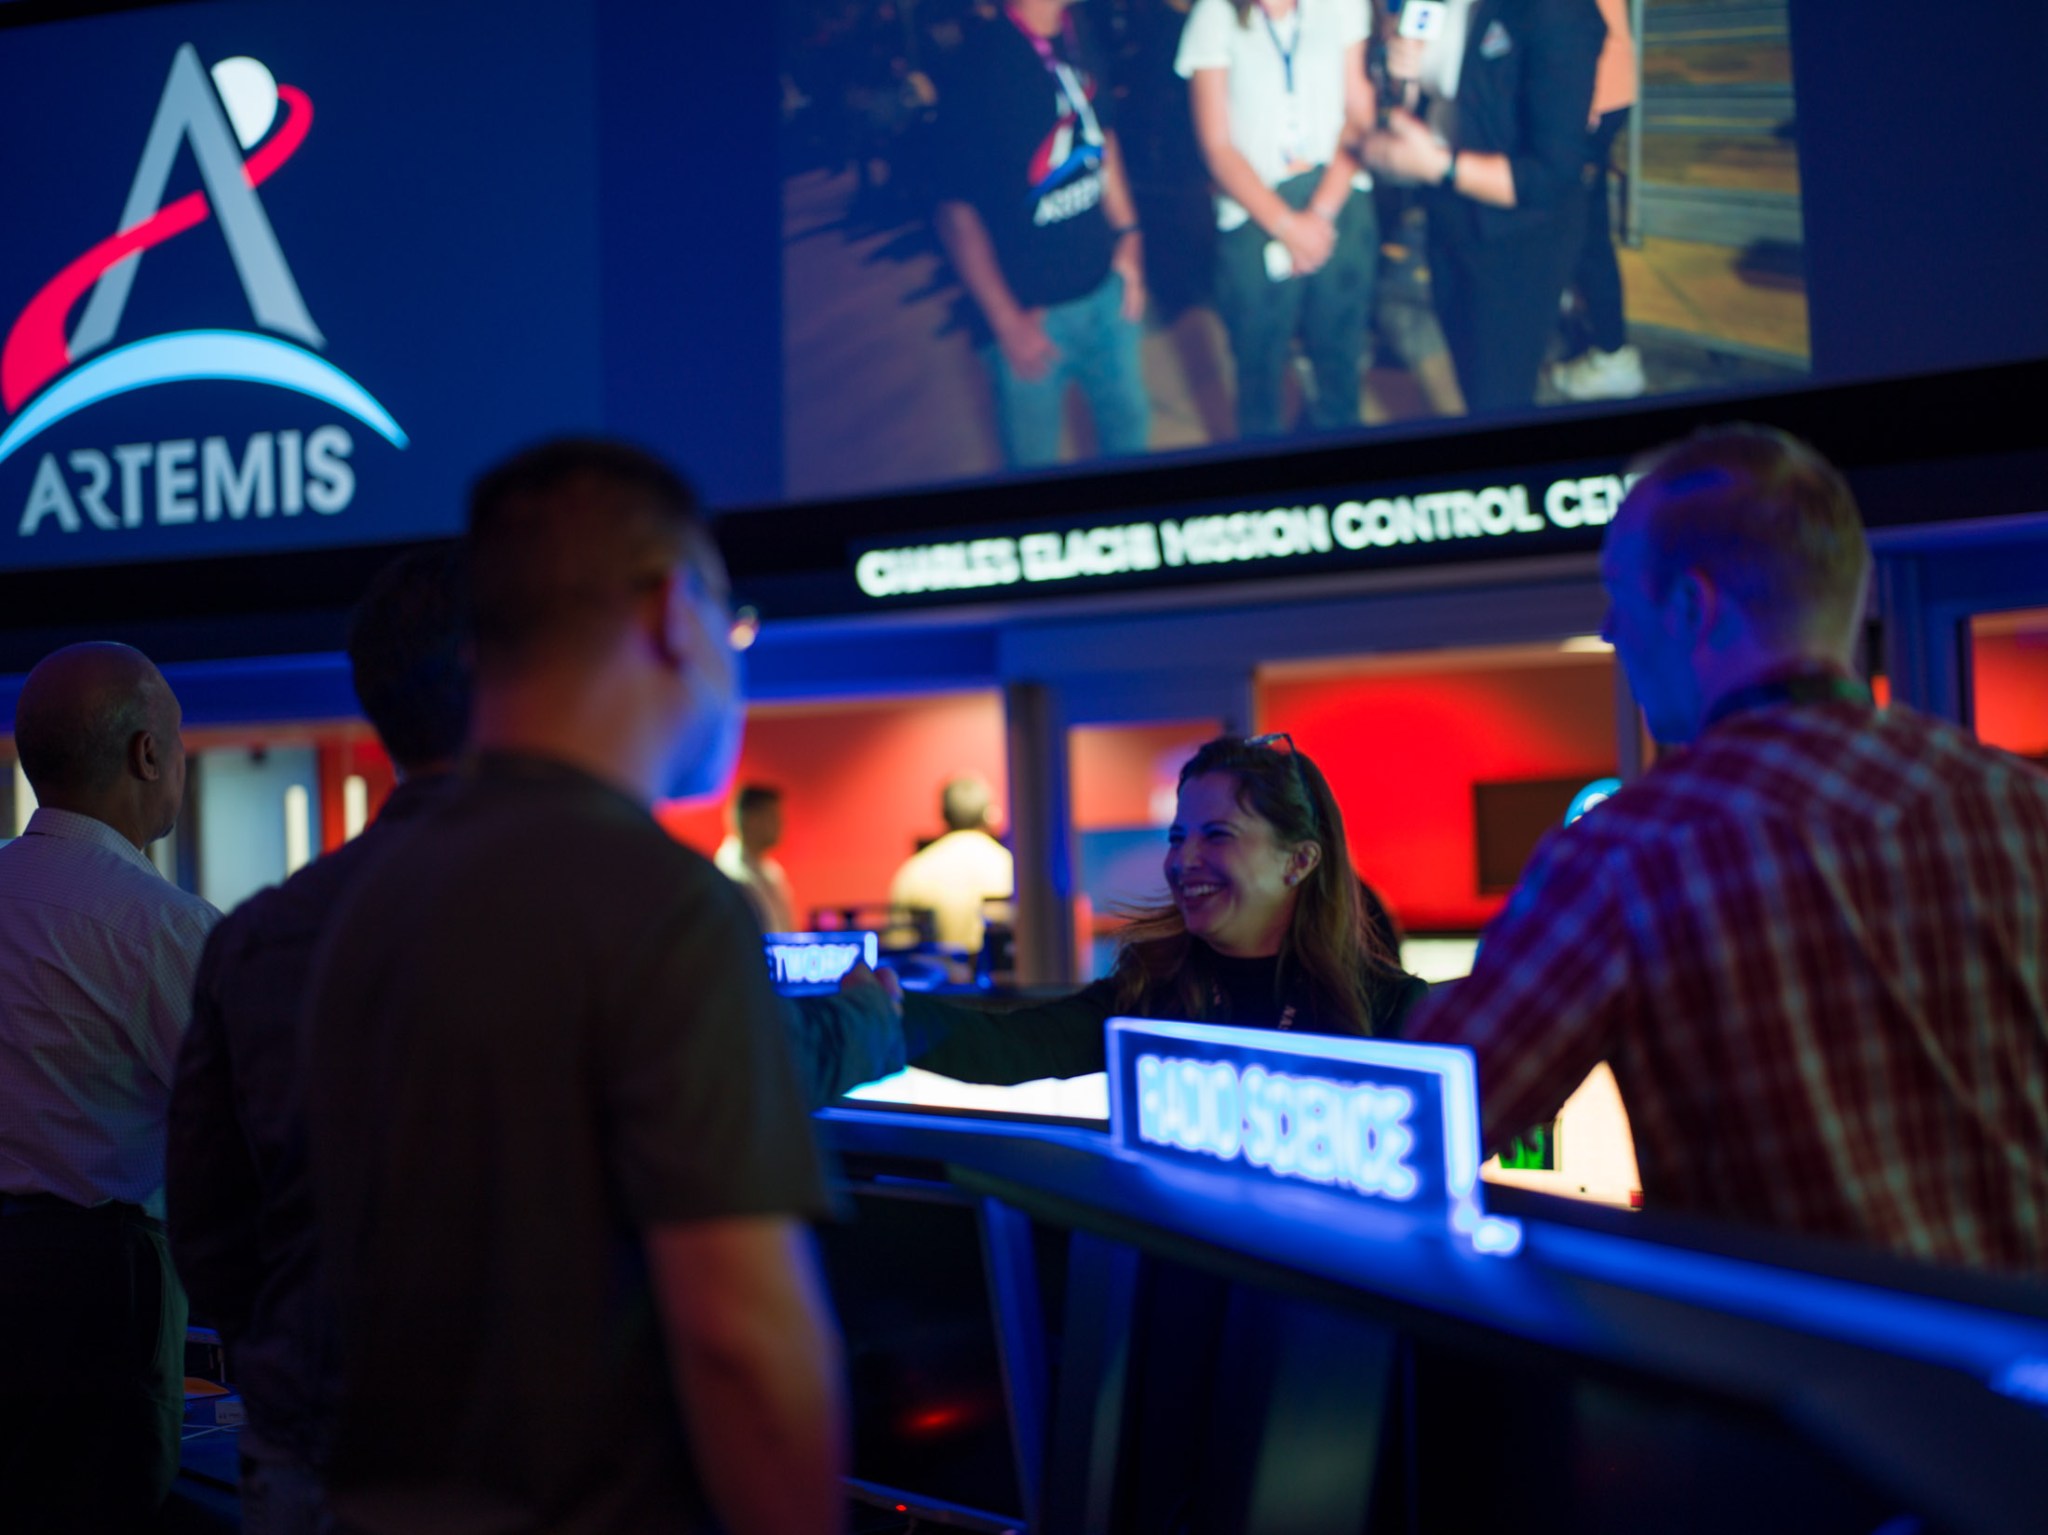 Five team members stand talking in the Charles Elachi Mission Control Center at NASA's Jet Propulsion Laboratory. A sign in the foreground reads "Radio Science." The Artemis logo can be seen on a large screen in the background.